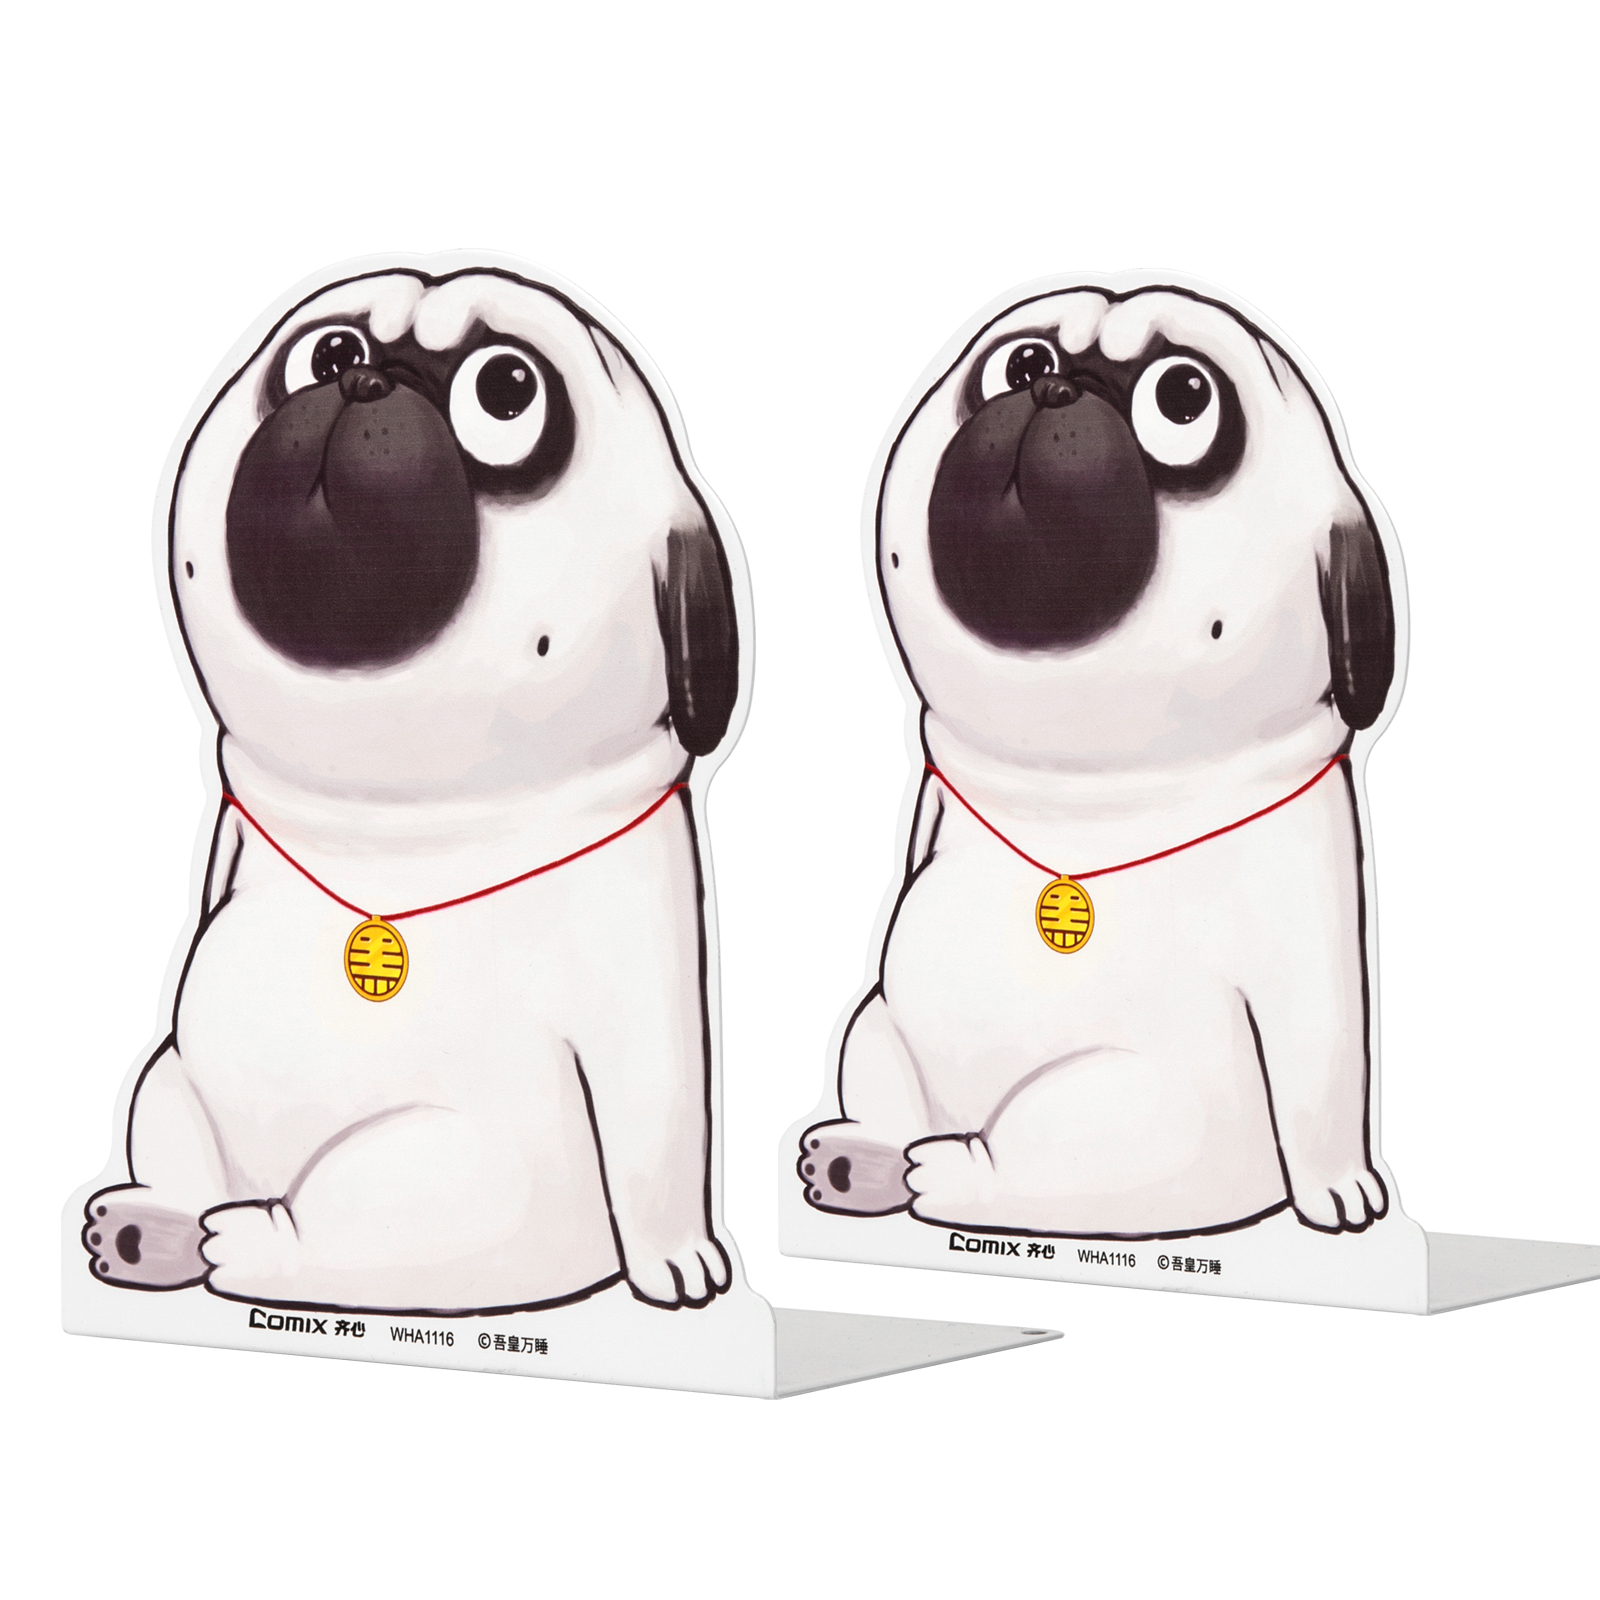 Comix Metal Bookends for Shelves, Unique Puppy-Shape Design Book Ends, Heavy Duty Decorative Book Support Non-Skid for Home Office Desk School Library Organizer, 1 Pair